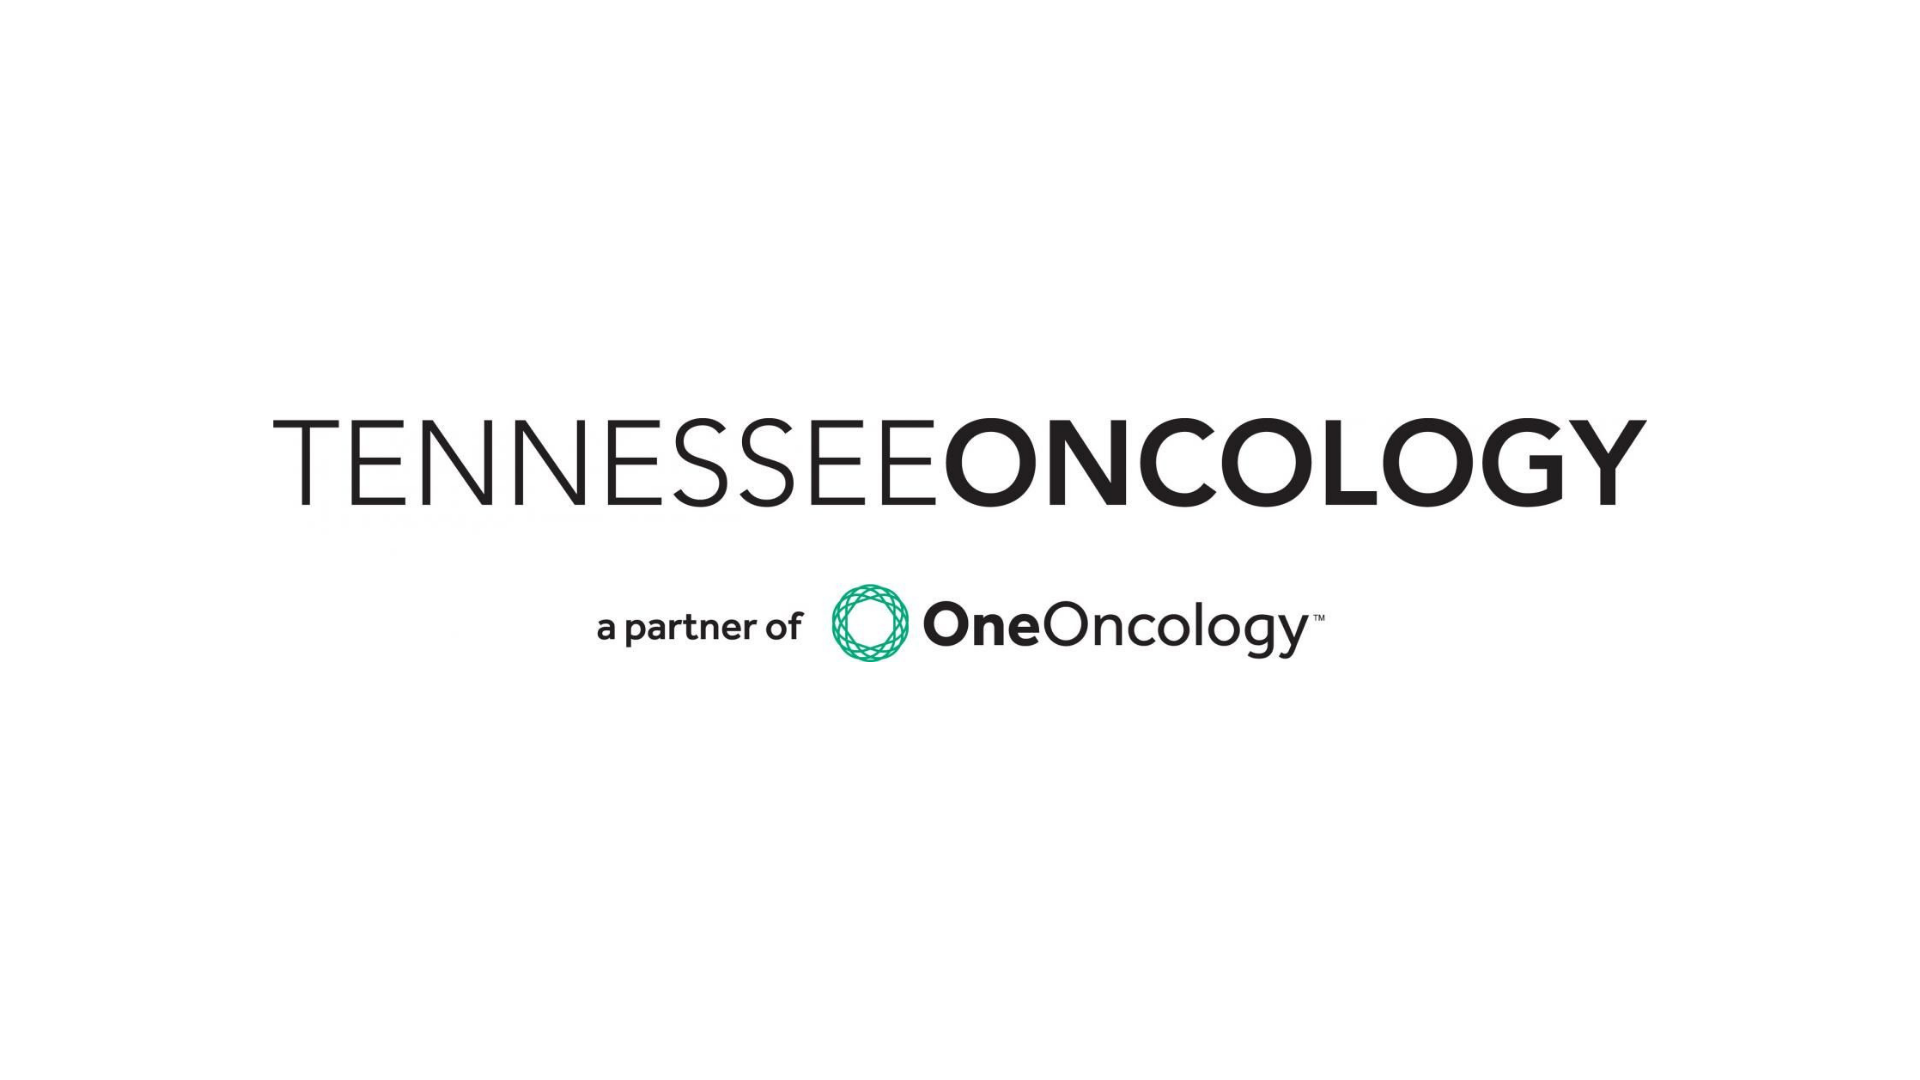 Tennessee Oncology Achieves High Quality Score and Saves Millions During the Final Year of Medicare’s OCM 